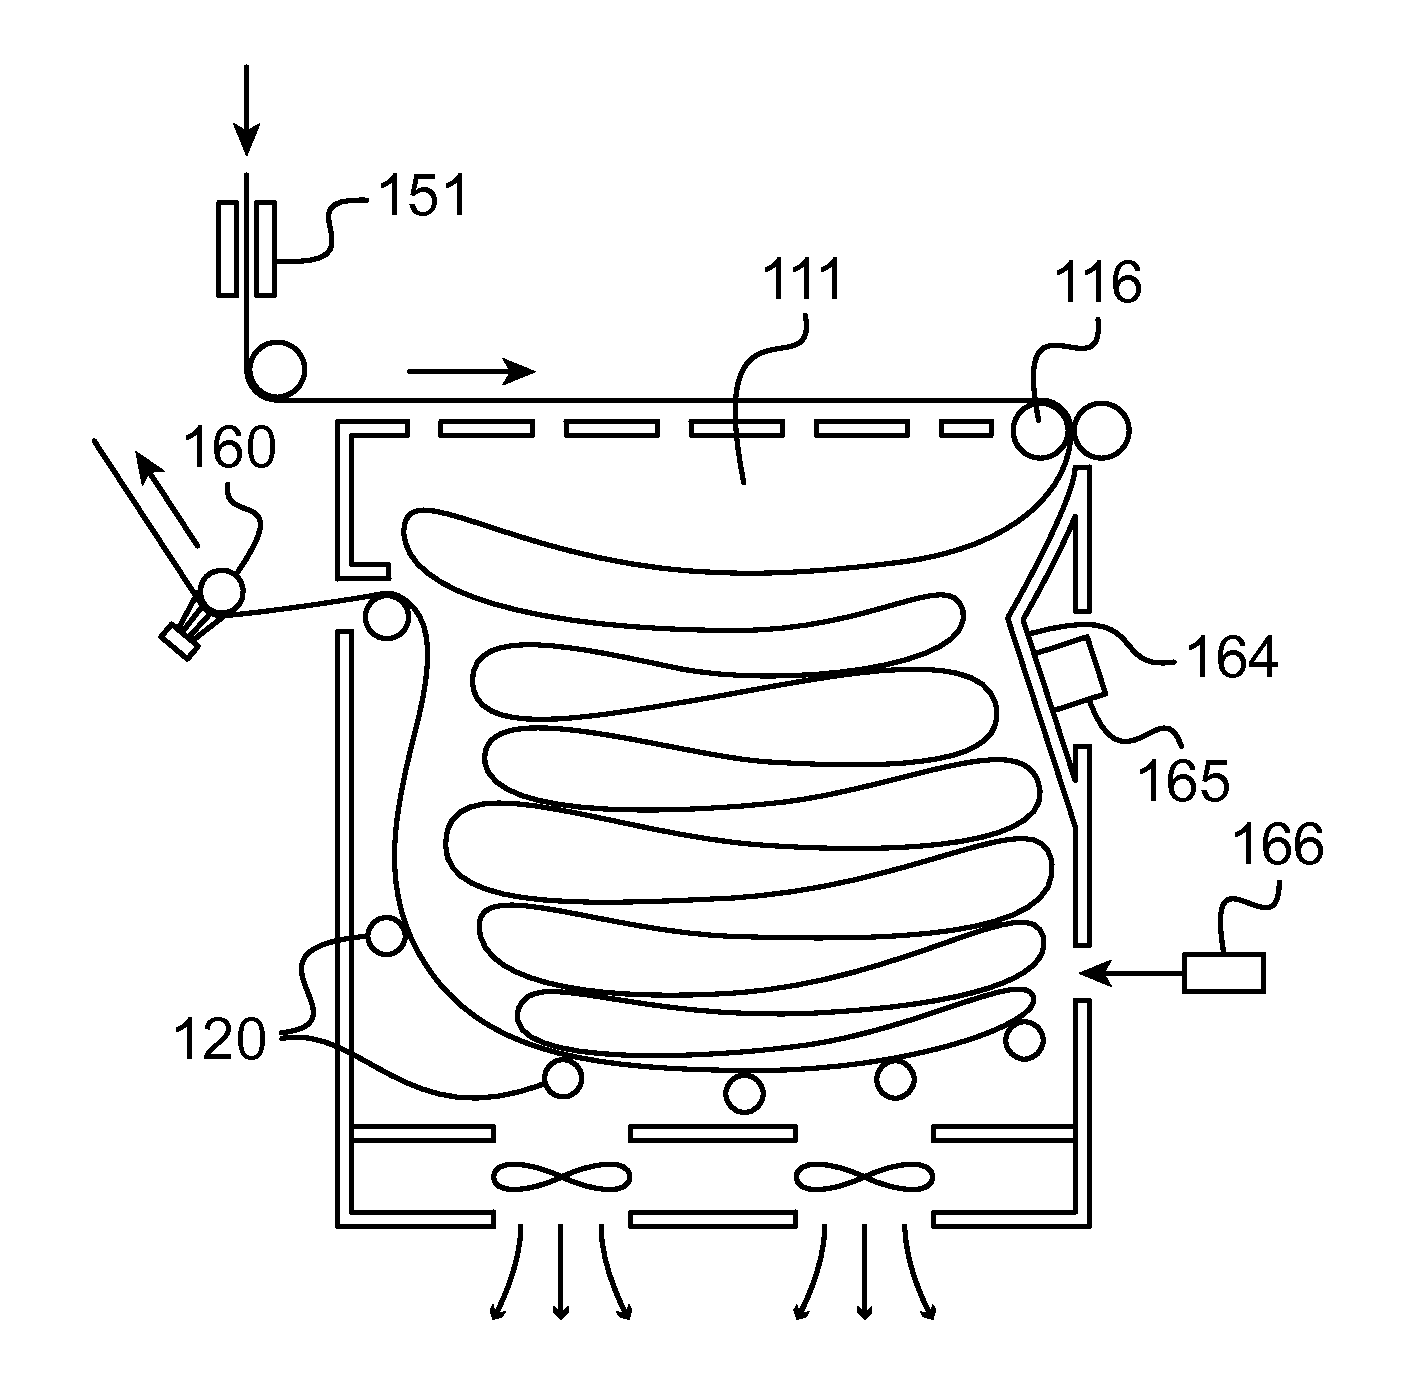 Device for accumulating flat material in flexible strip form